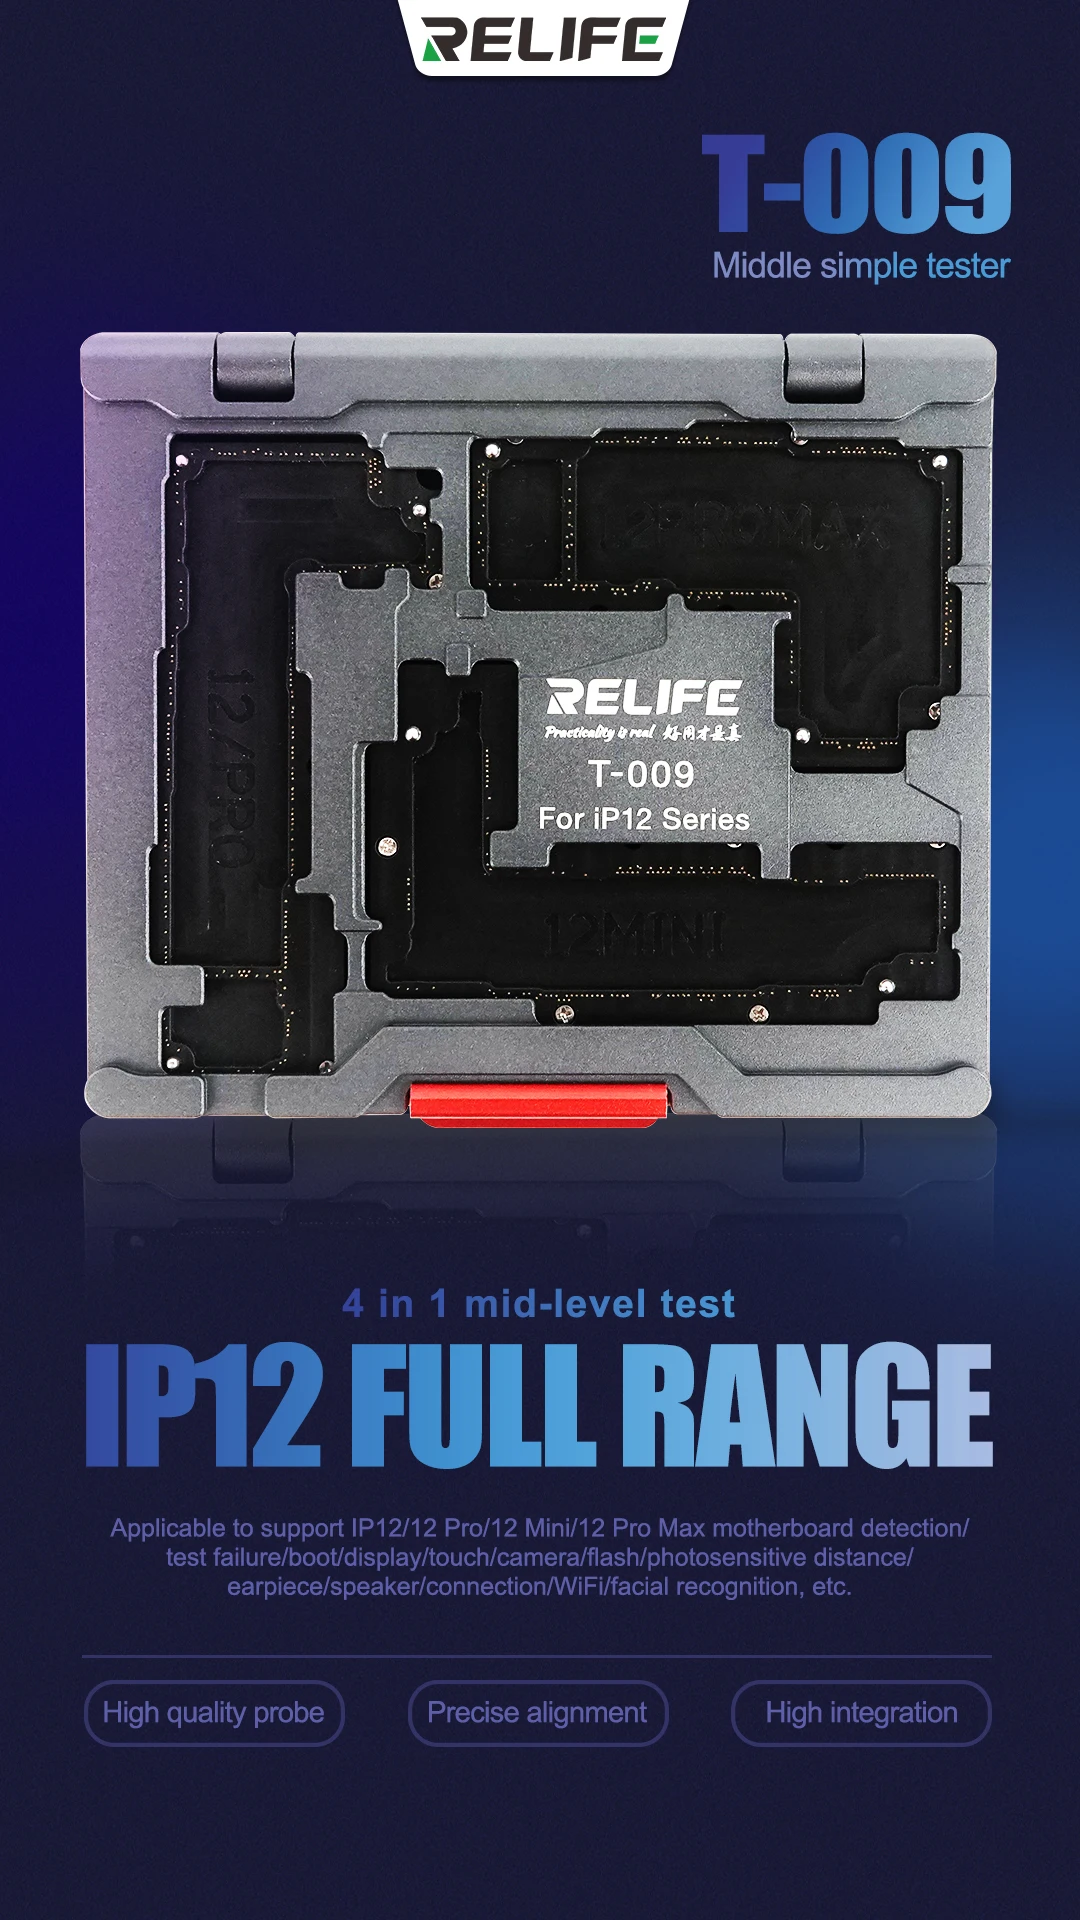 RELIFE T-009 4 in 1 IP12 Motherboard Mid-level Test Stand for IP12/12 Pro/12 Mini/12 Pro Max Motherboard Detection/boot/display